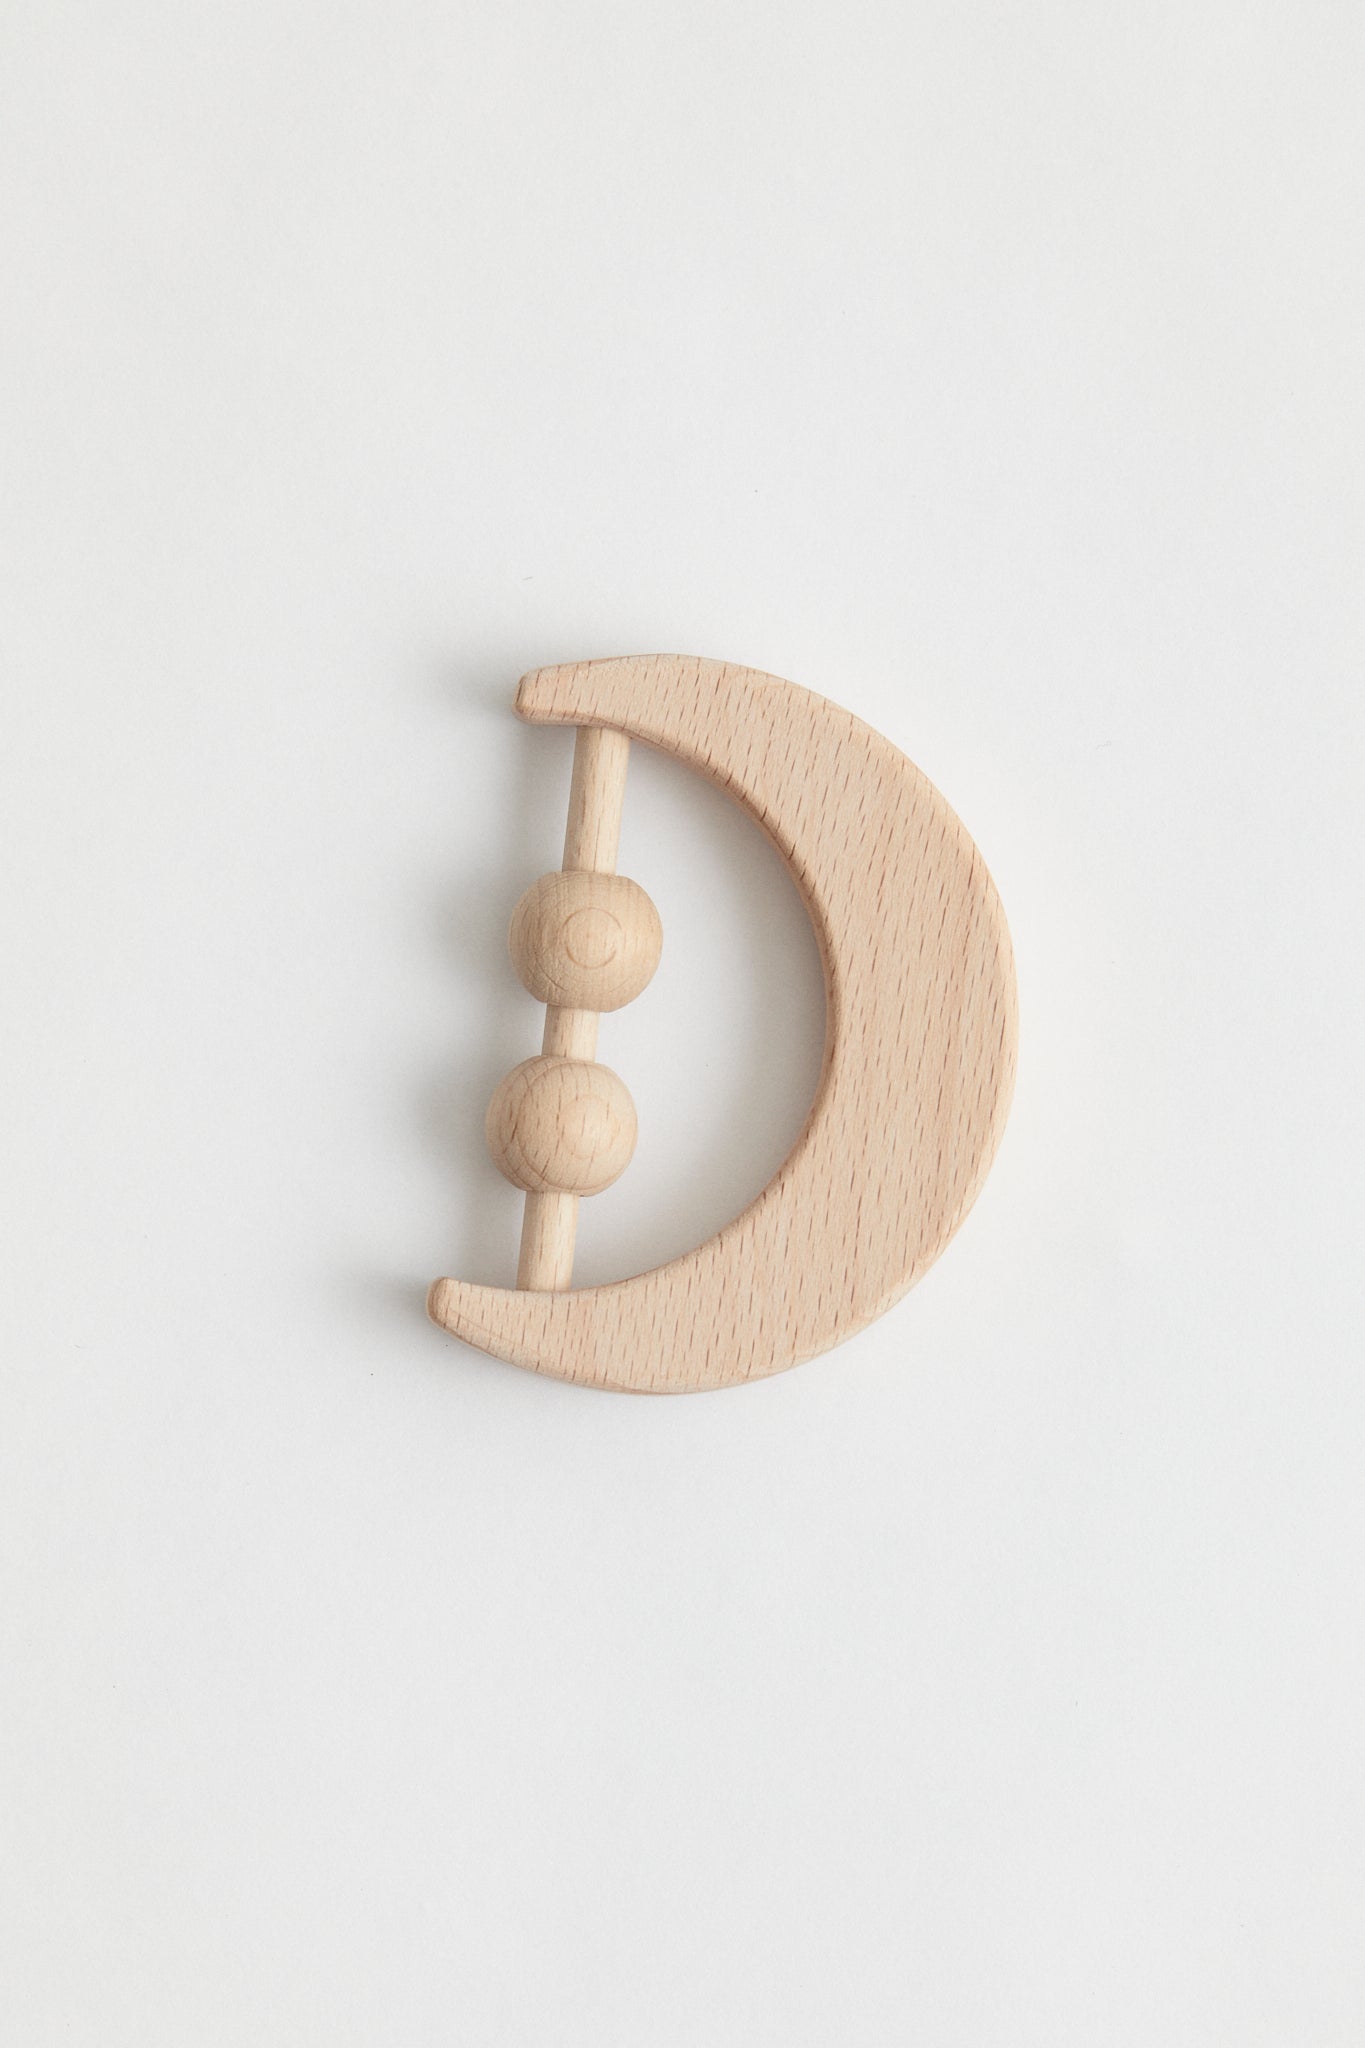 Crescent moon shaped rattle made from beech wood. Two beads for sound when shaking.